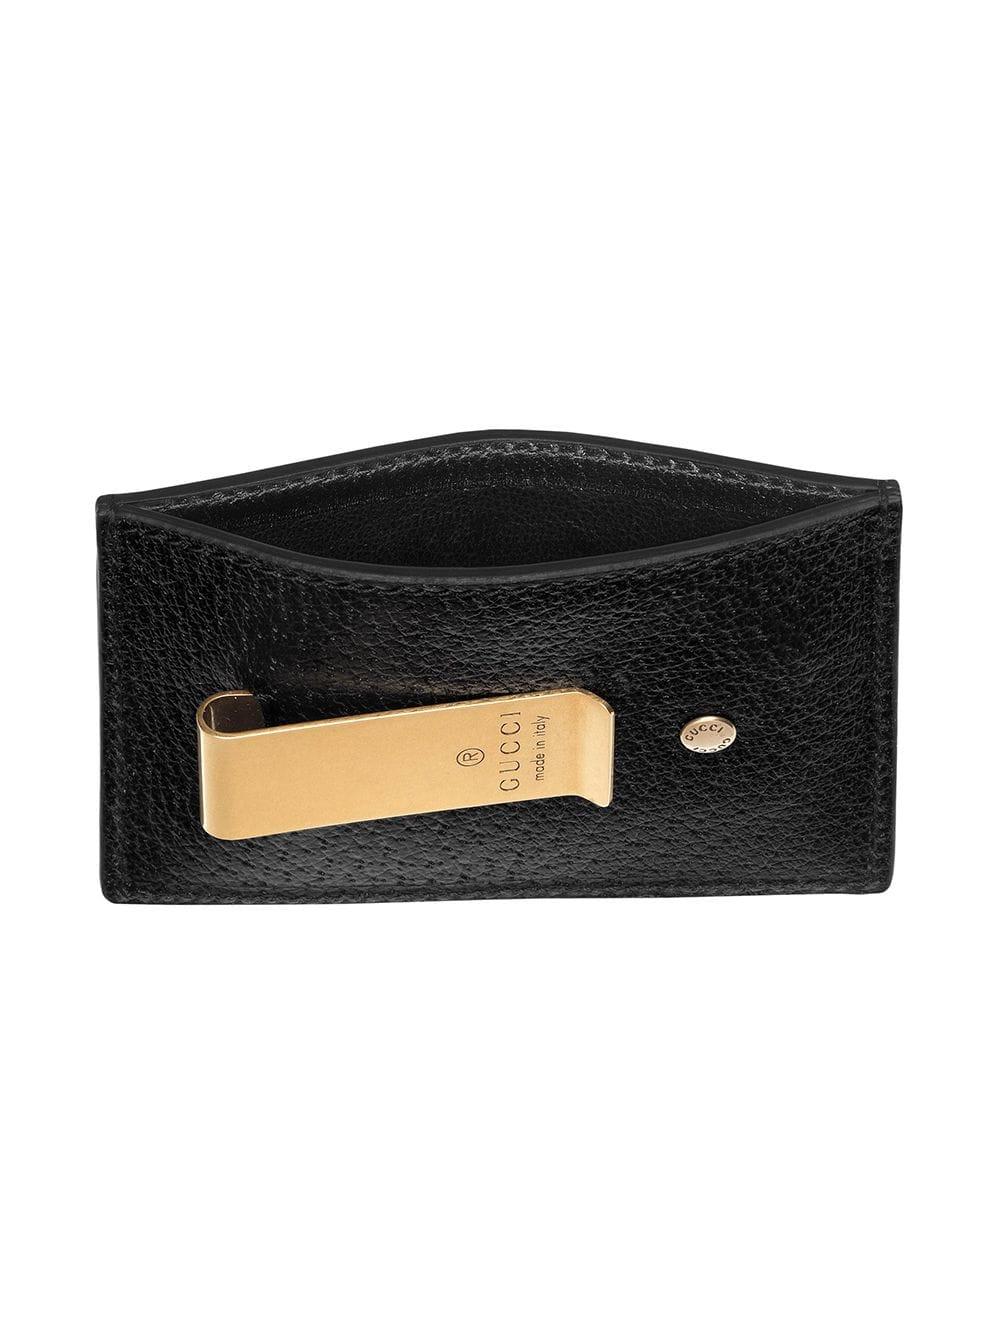 Gucci Leather Money Clip With Web in Black for Men - Lyst